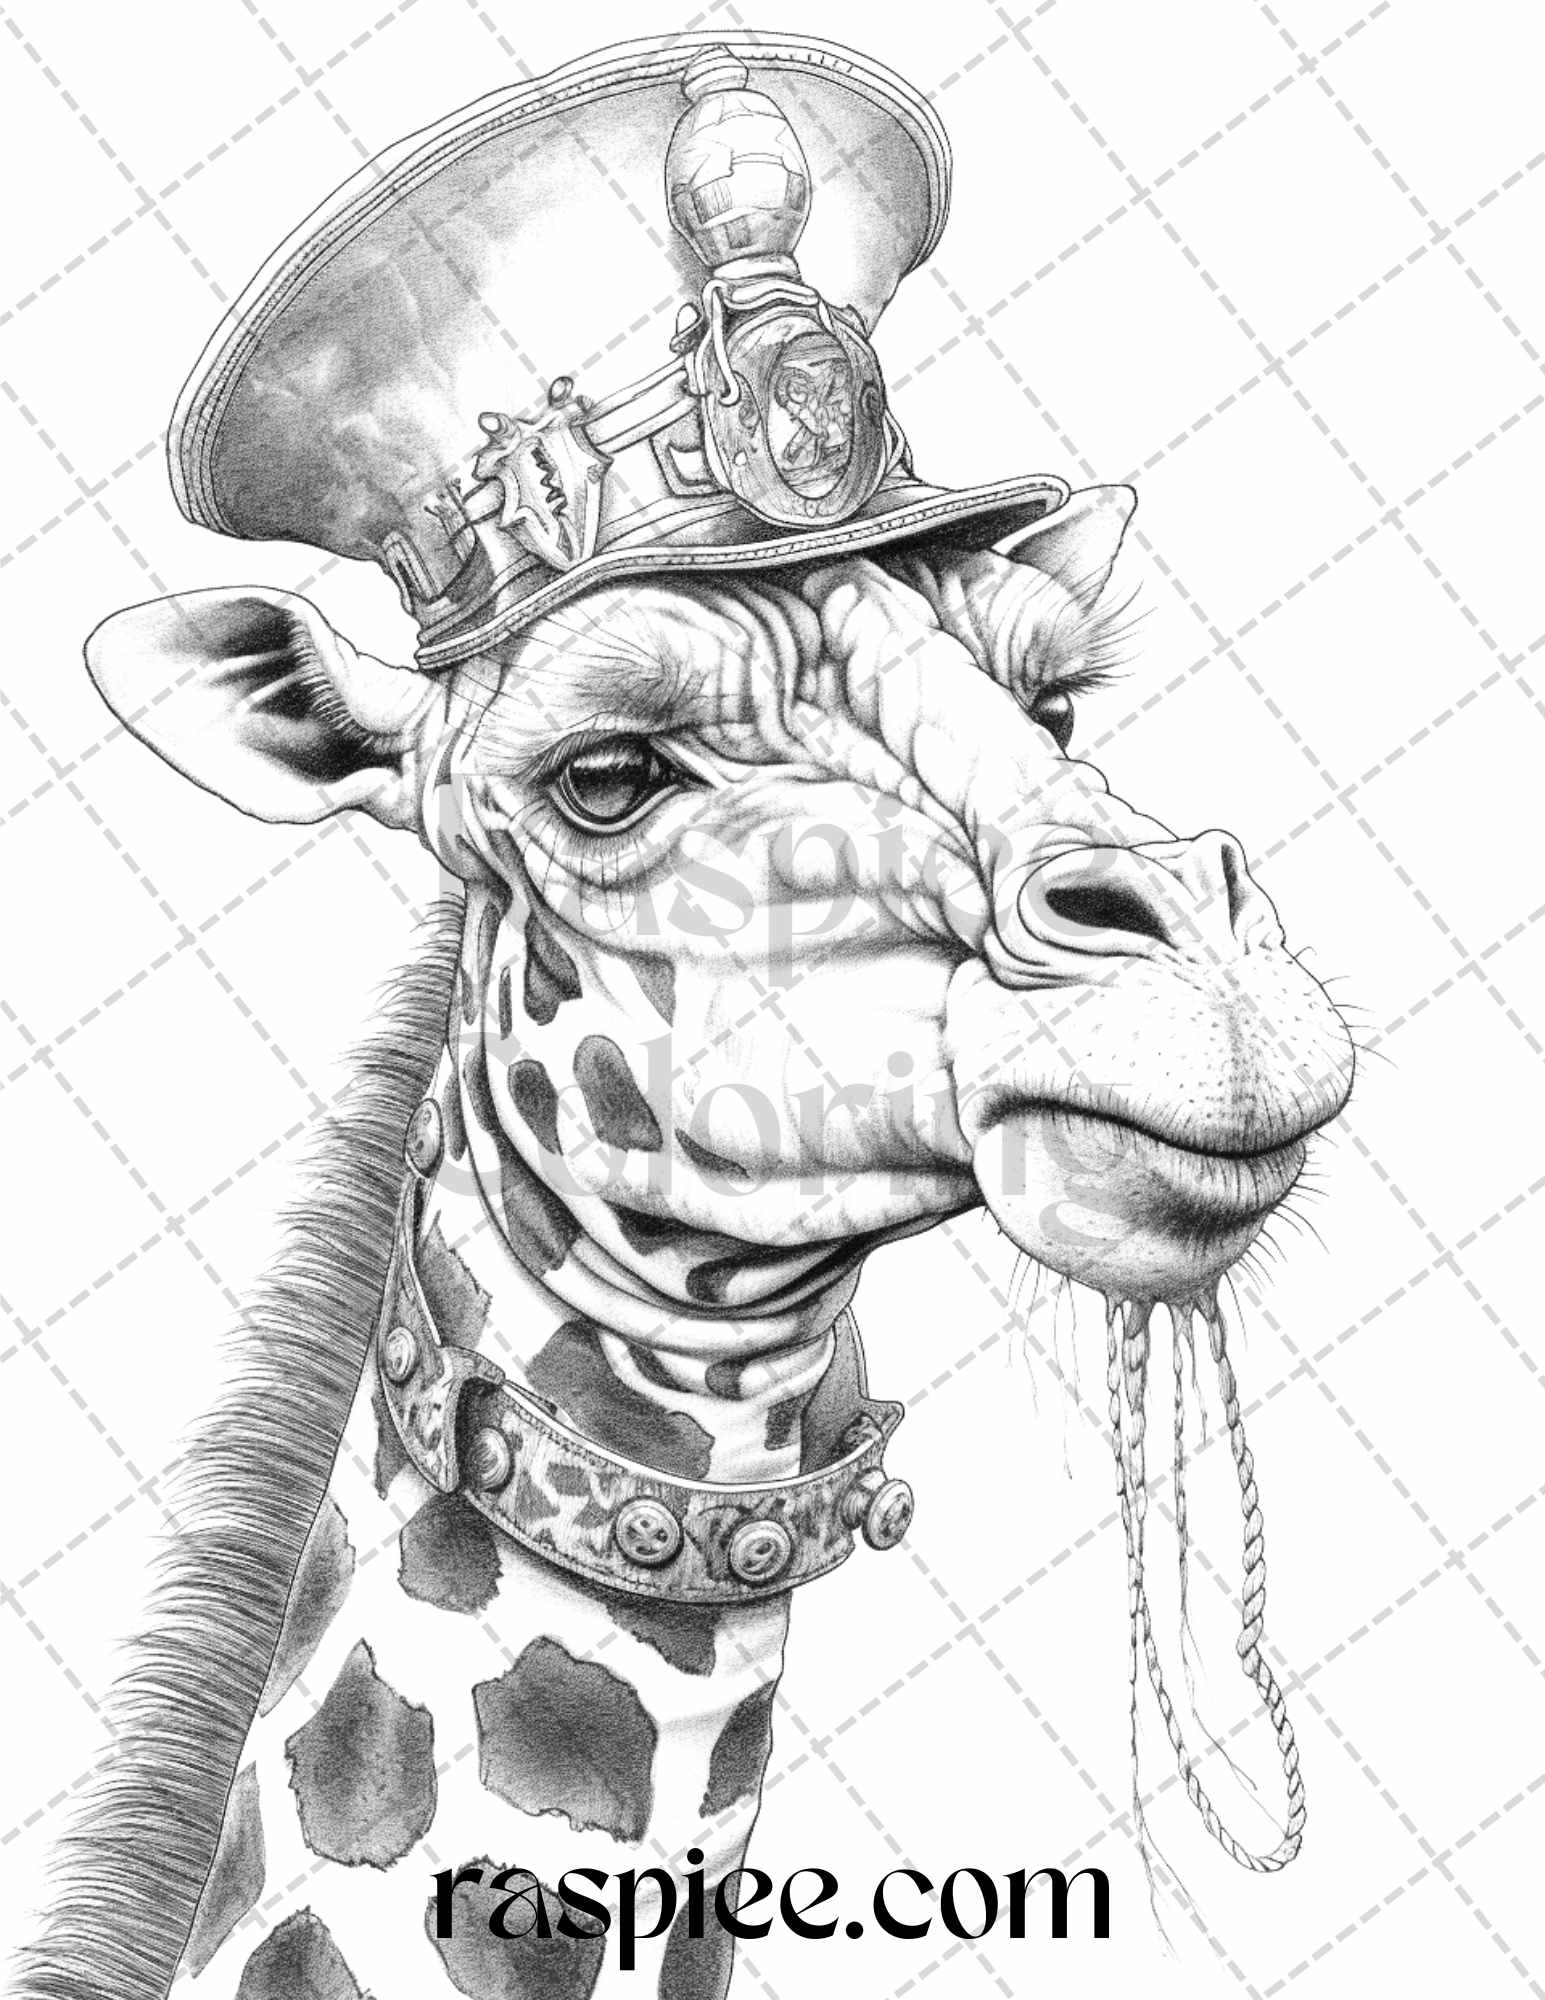 40 Pirate Animals Grayscale Coloring Pages Printable for Adults, PDF File Instant Download - raspiee